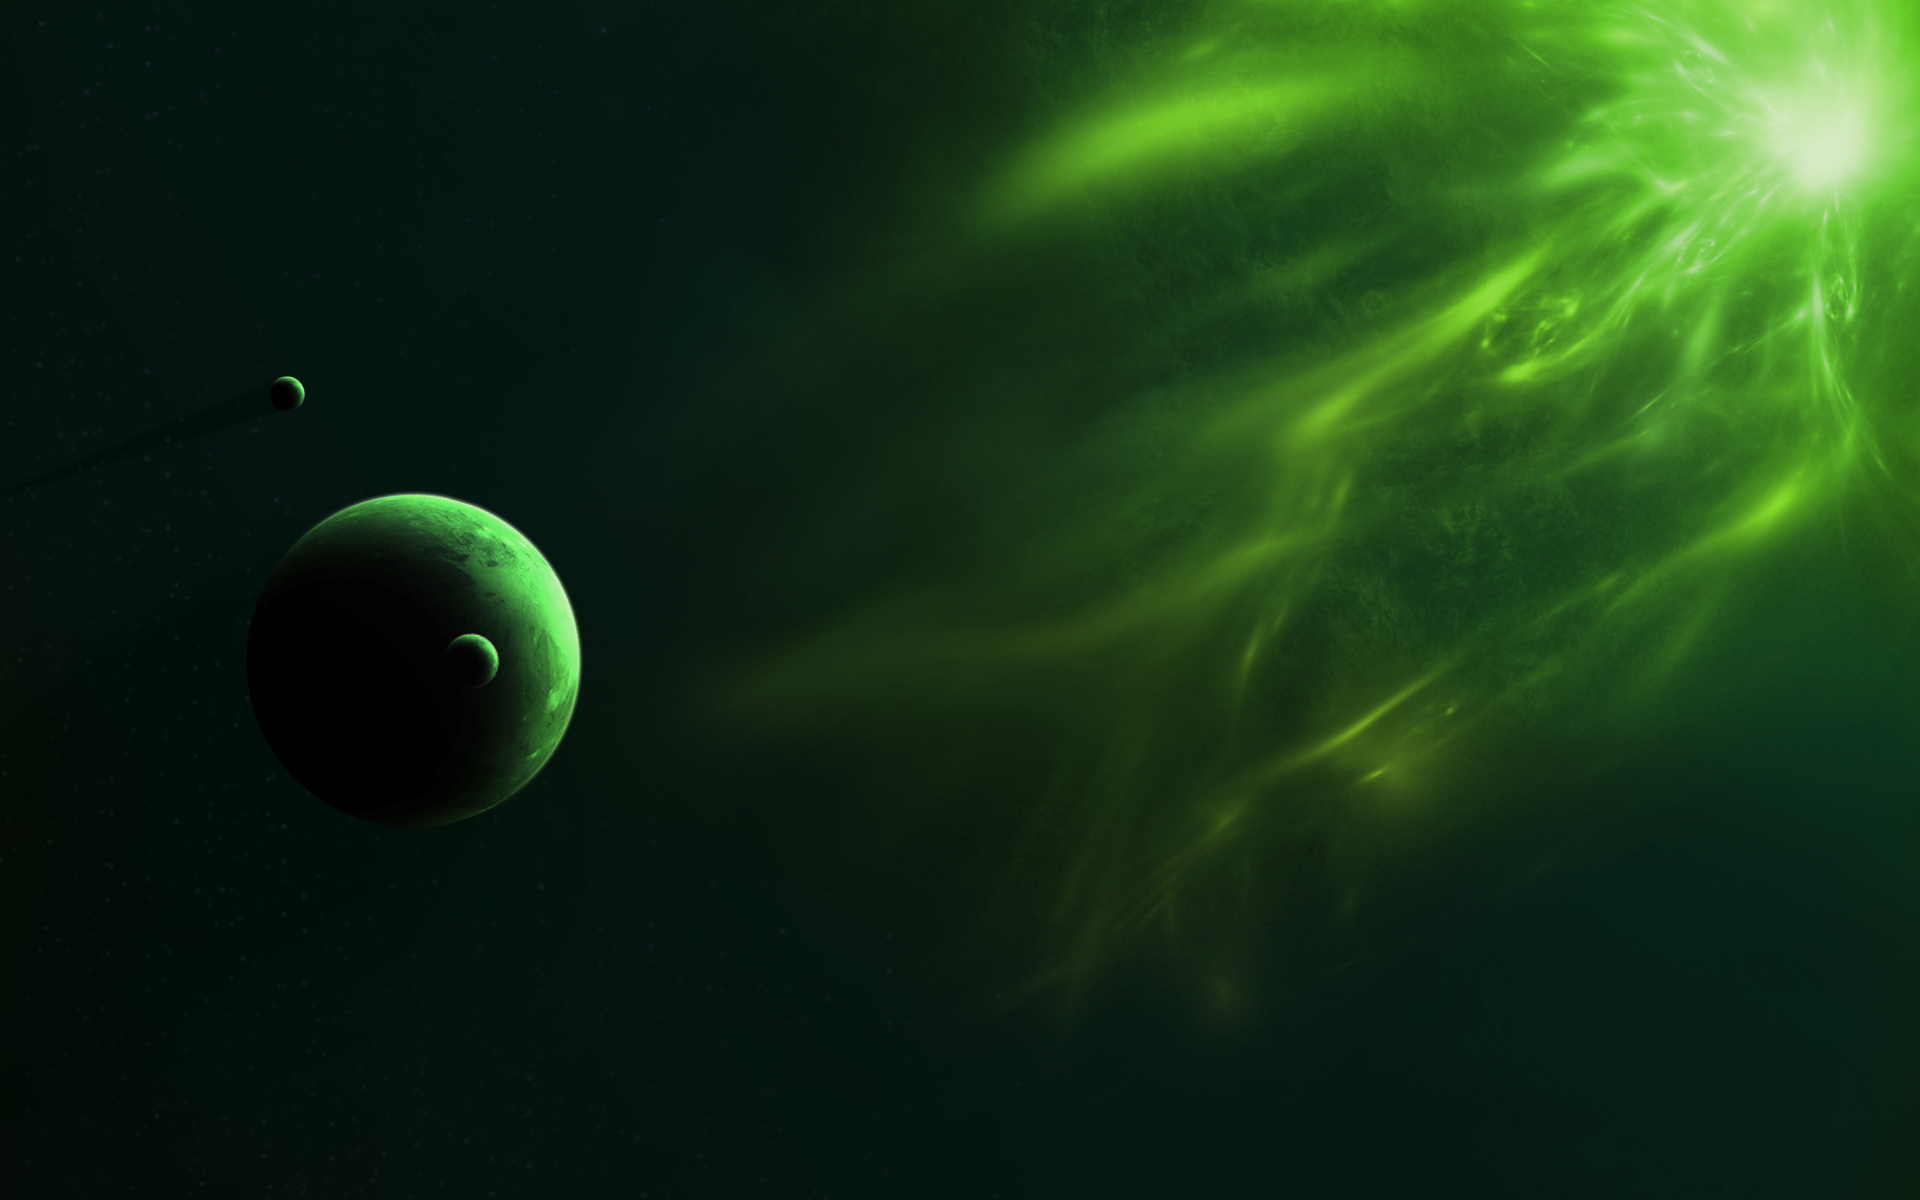 green space wallpaper,green,nature,space,astronomical object,atmosphere